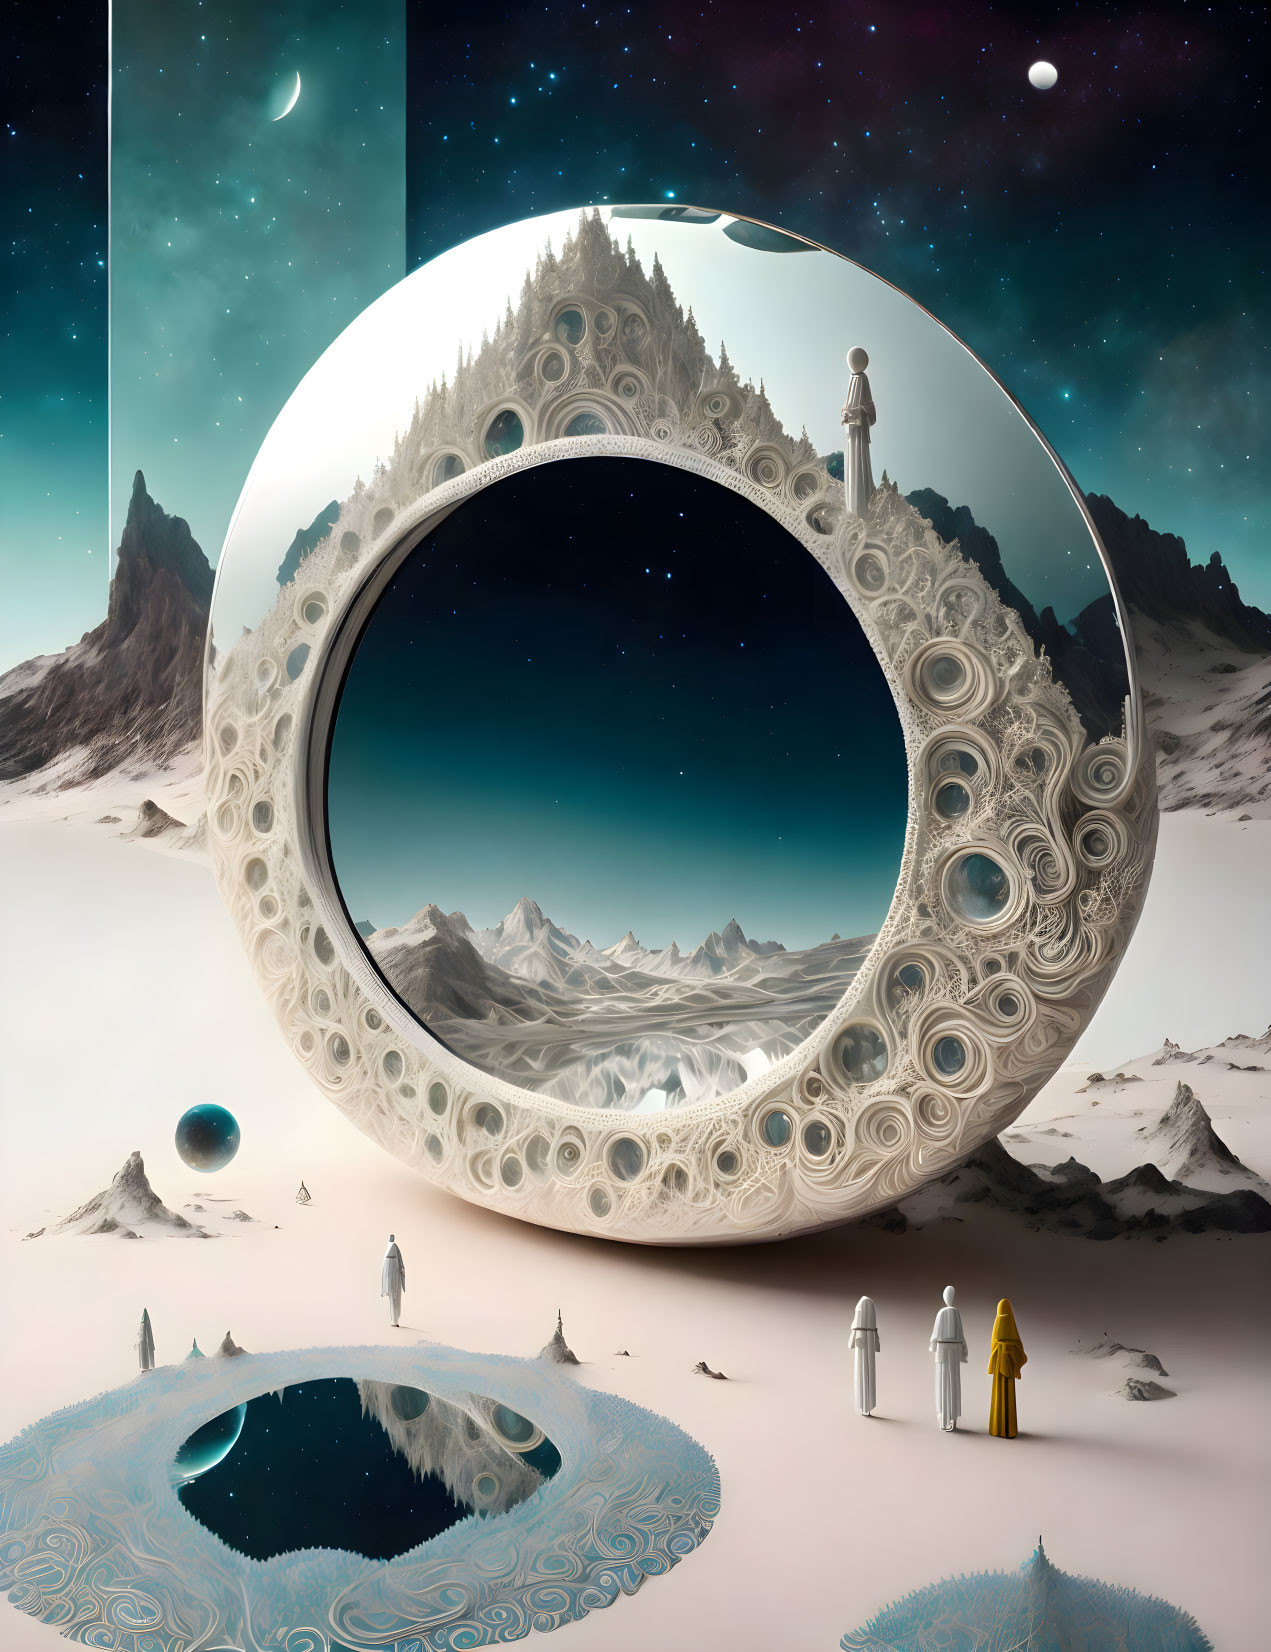 Surreal circular structure with mountainous landscape, figures in robes, celestial bodies, and mirrored surface